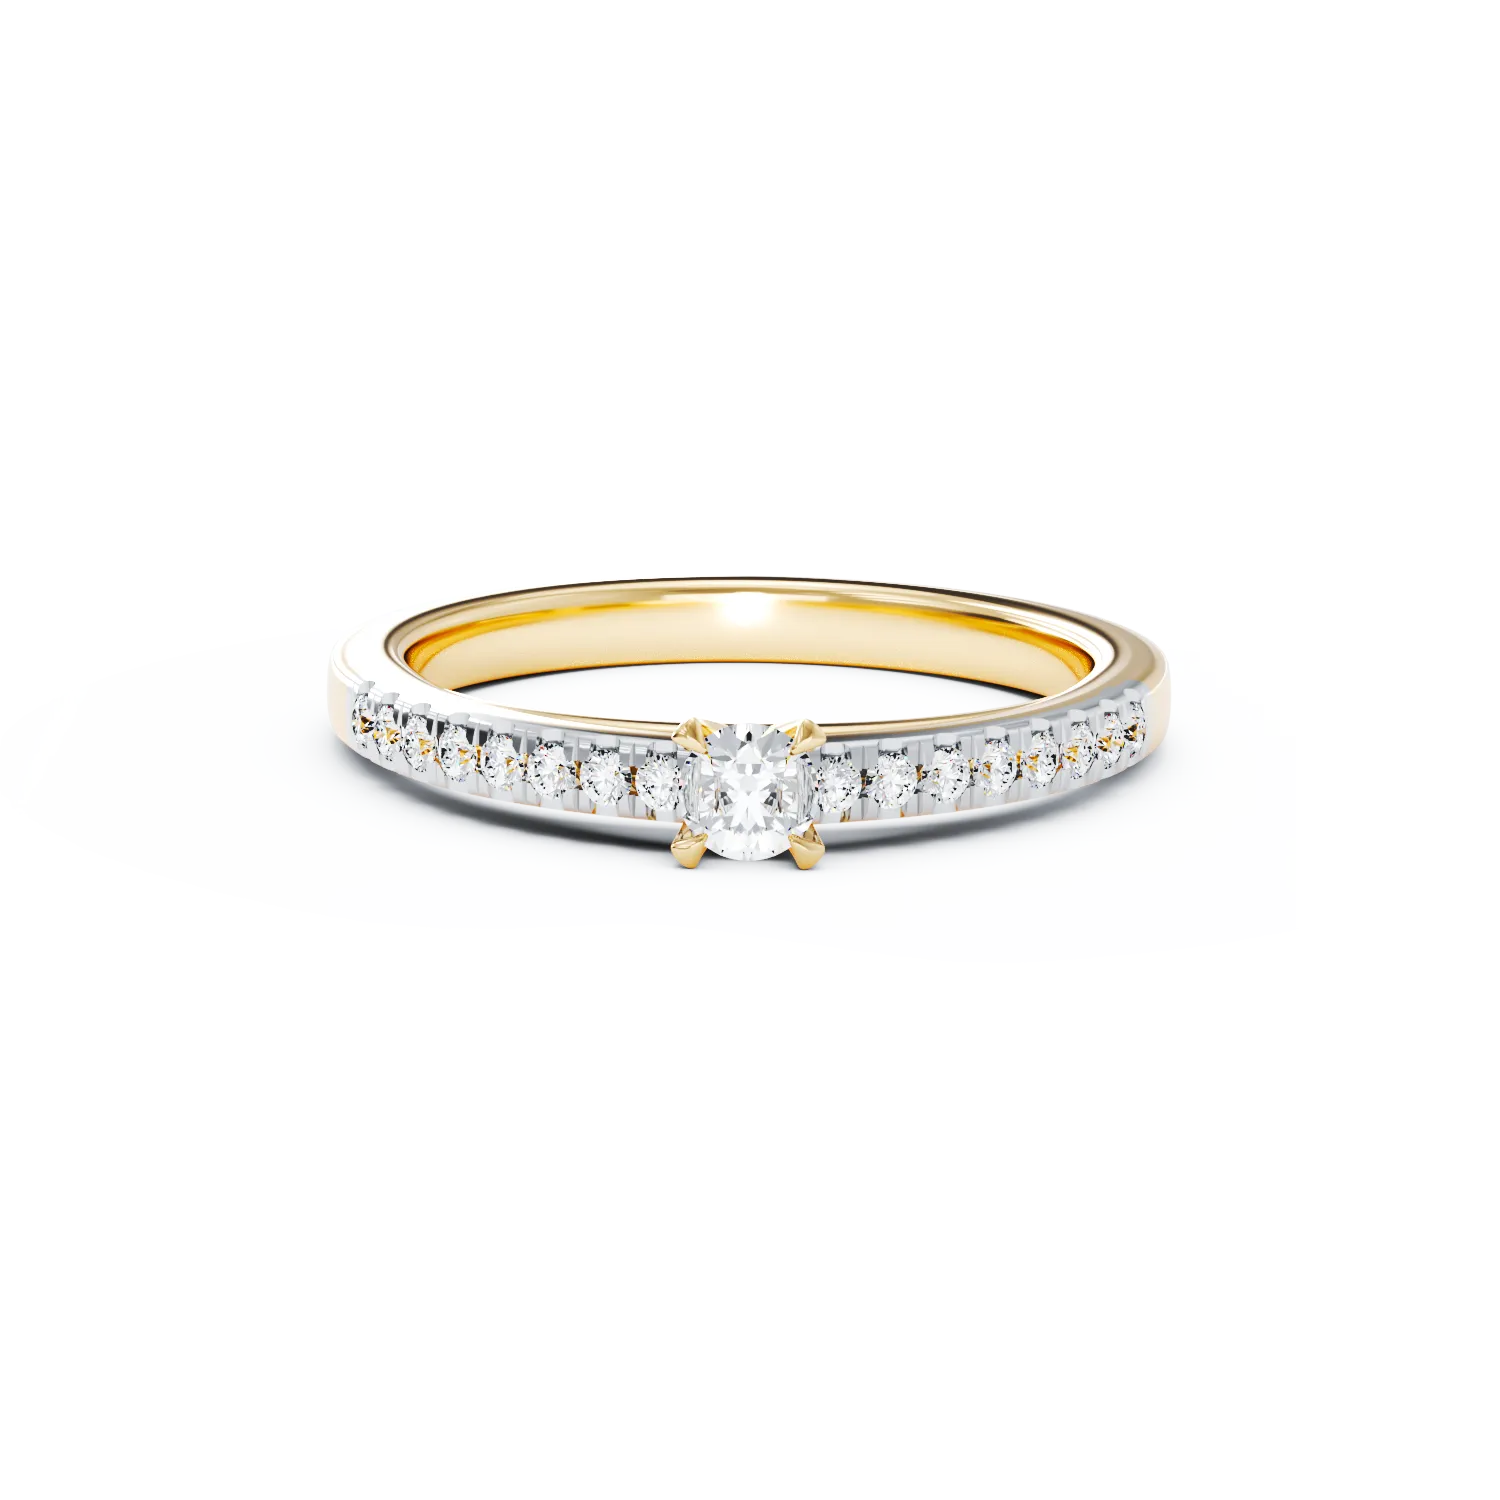 18K yellow gold engagement ring with 0.2ct diamond and 0.18ct diamonds